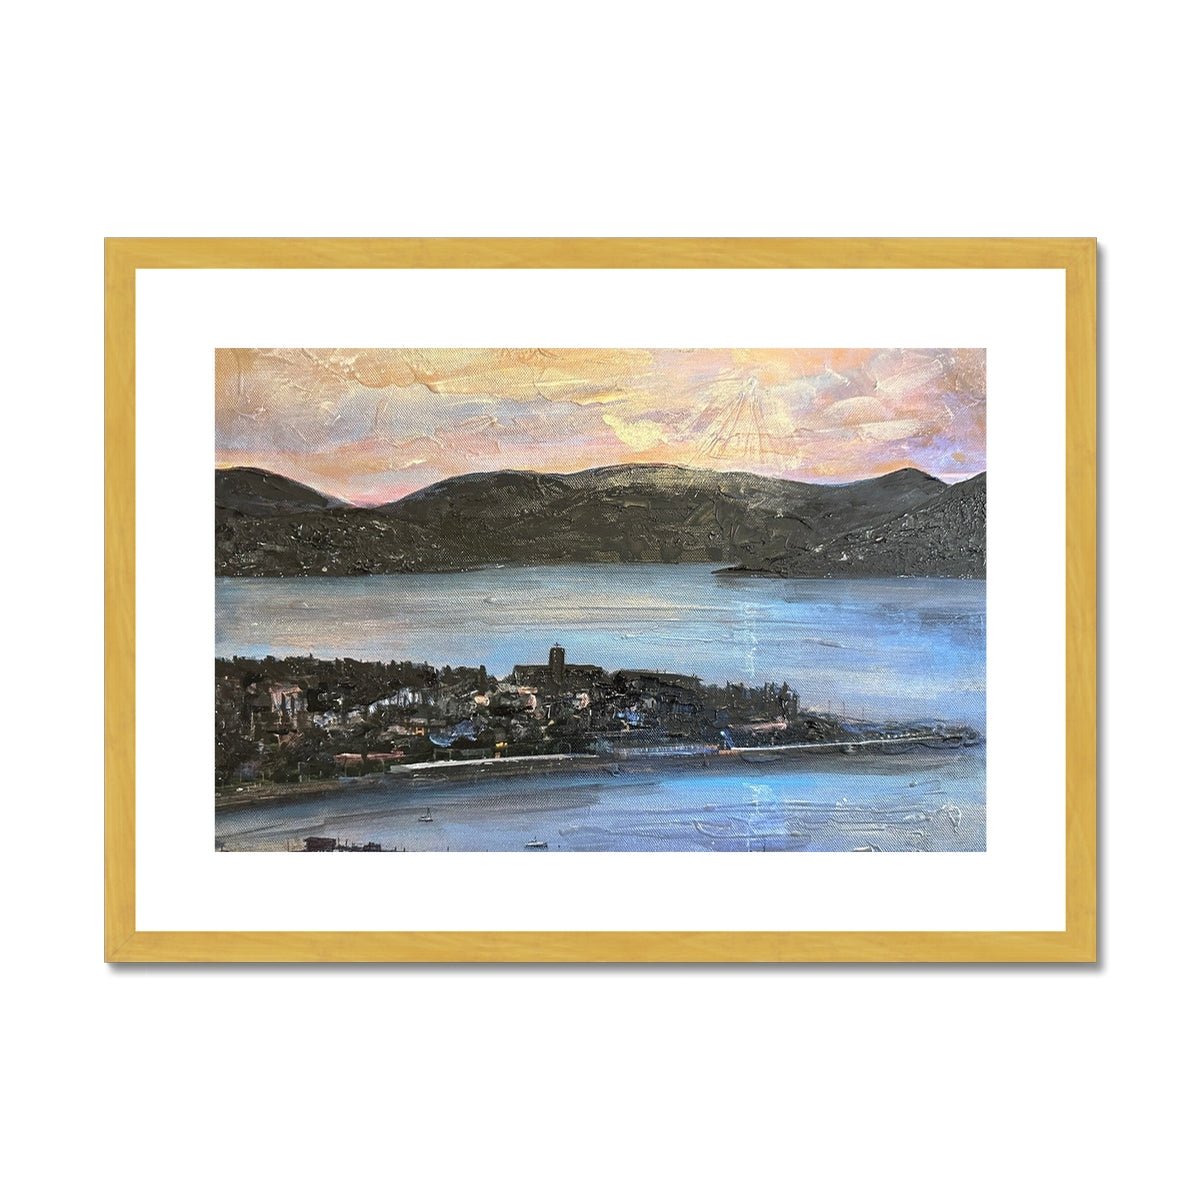 From Lyle Hill Painting | Antique Framed & Mounted Prints From Scotland-Antique Framed & Mounted Prints-River Clyde Art Gallery-A2 Landscape-Gold Frame-Paintings, Prints, Homeware, Art Gifts From Scotland By Scottish Artist Kevin Hunter